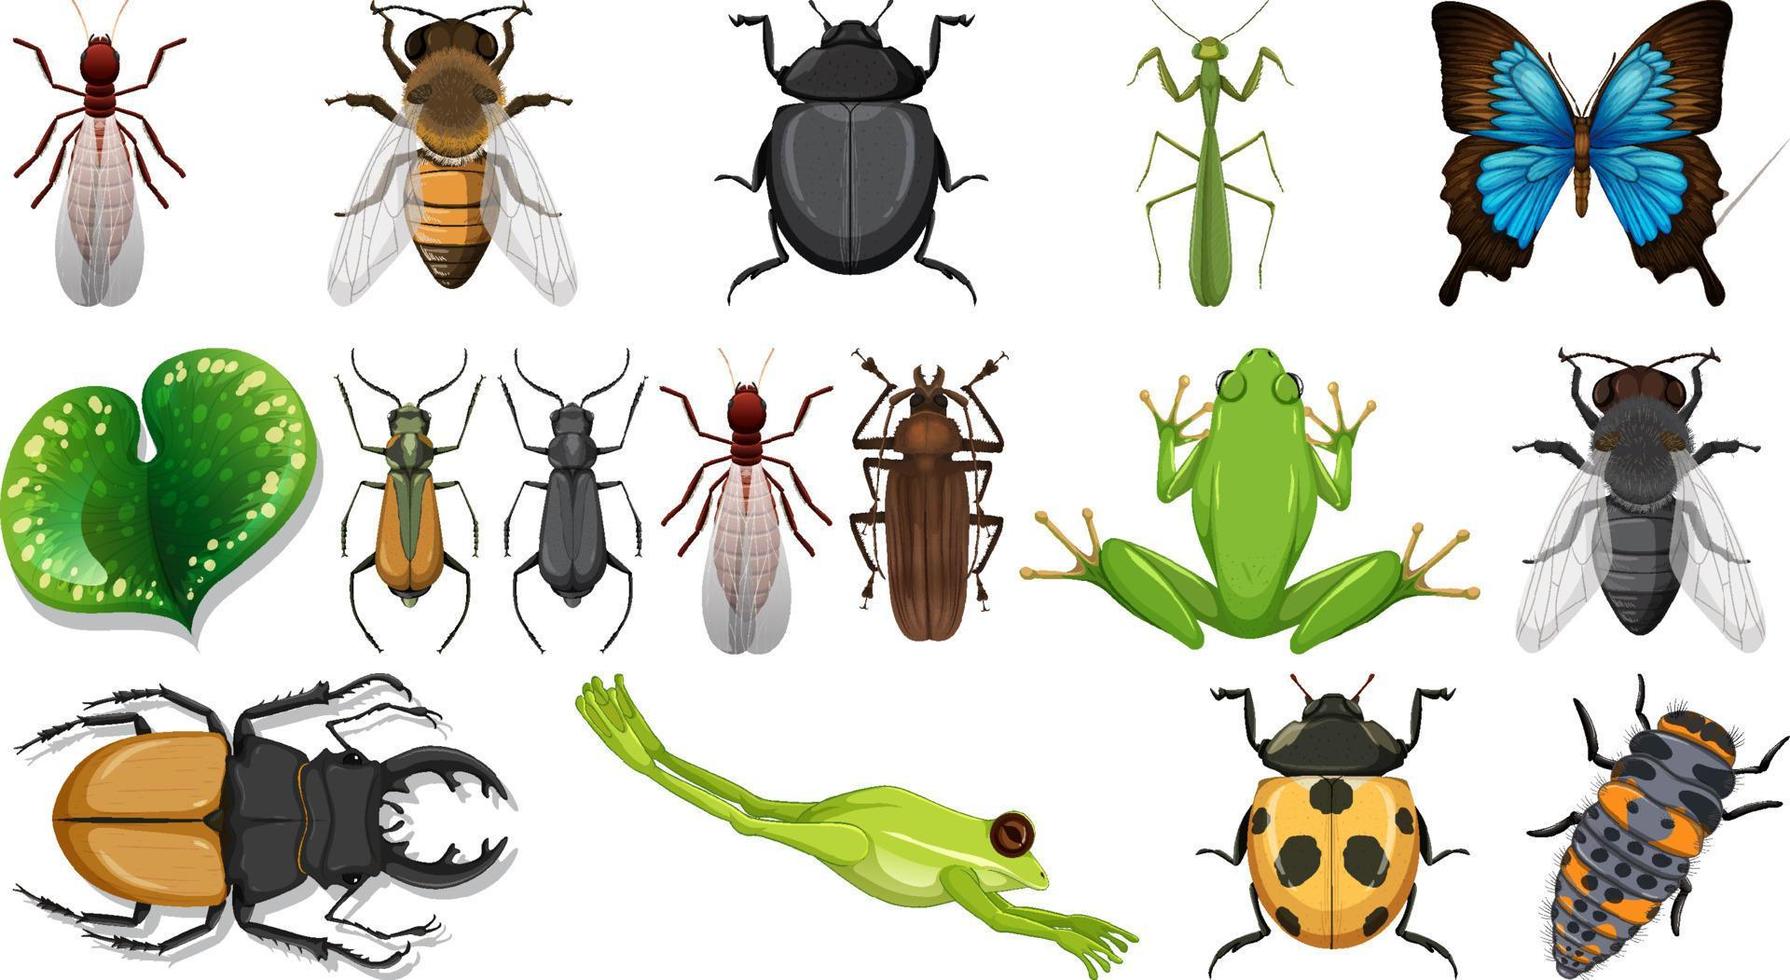 Different insects collection isolated on white background vector